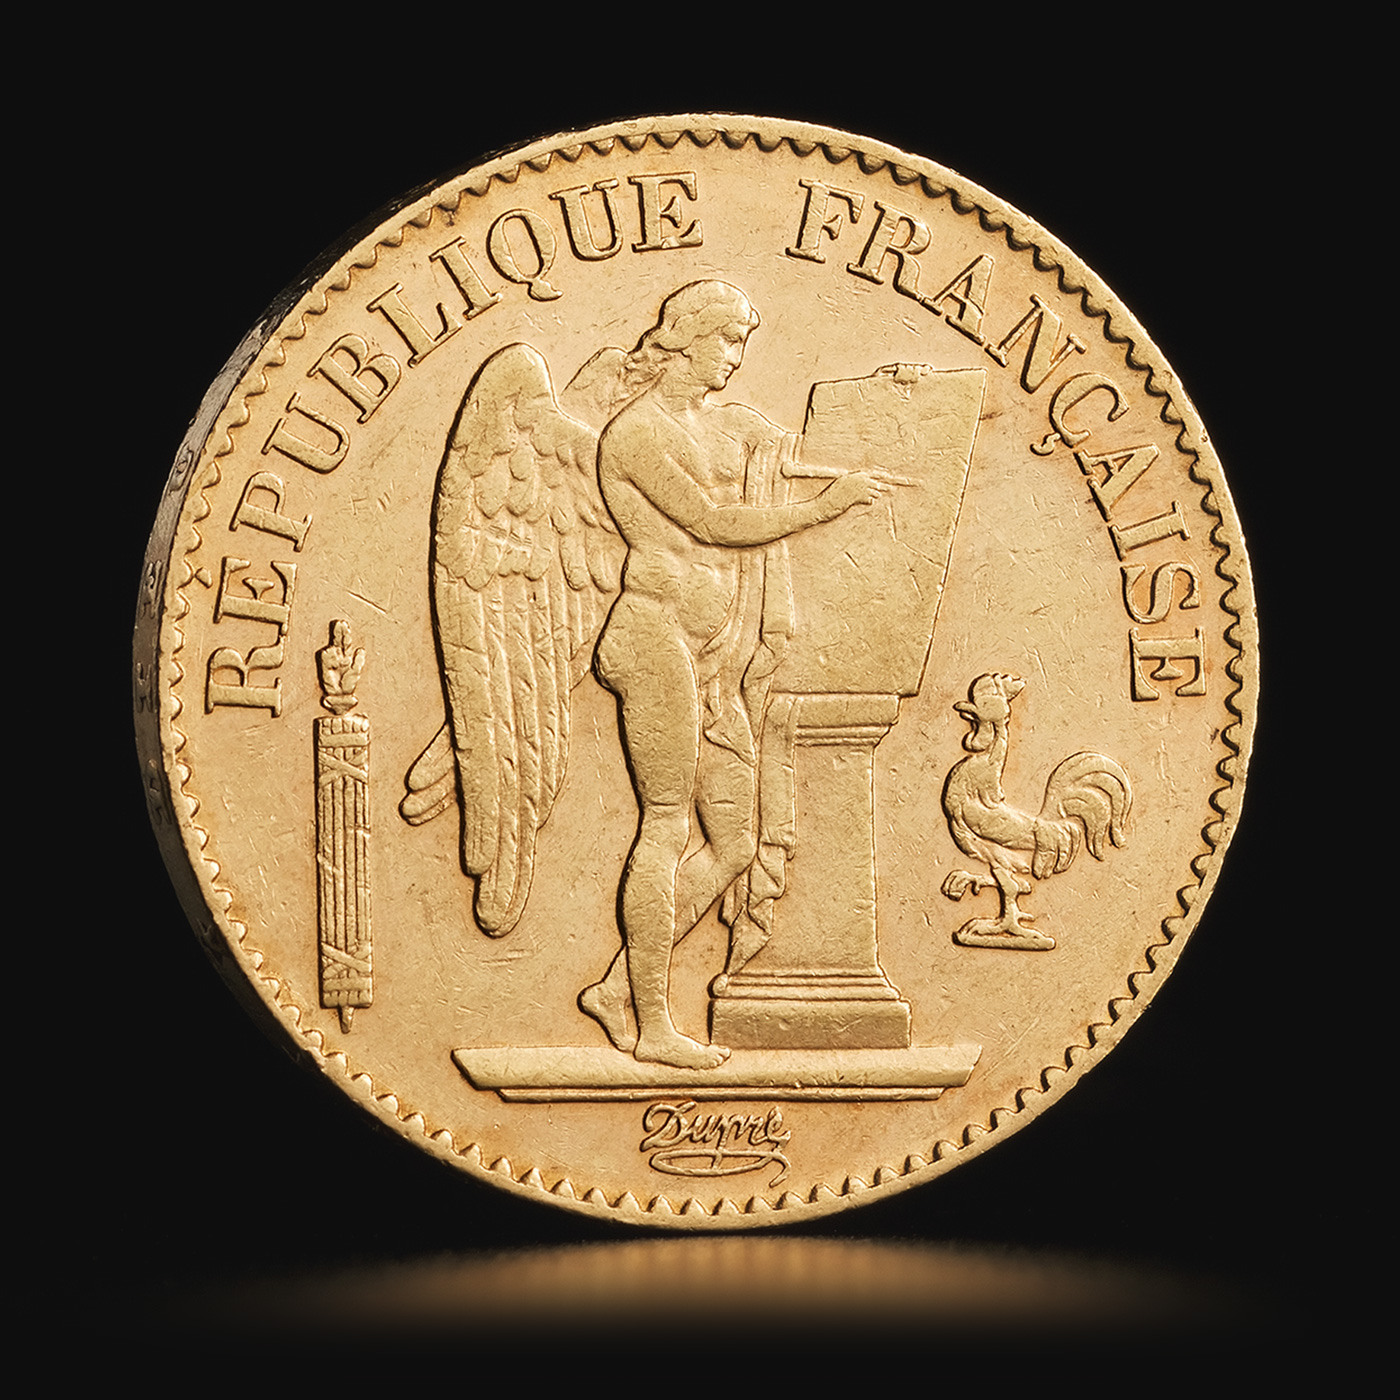 French 20 Francs Angel (Genius) Gold Coin | Tavex